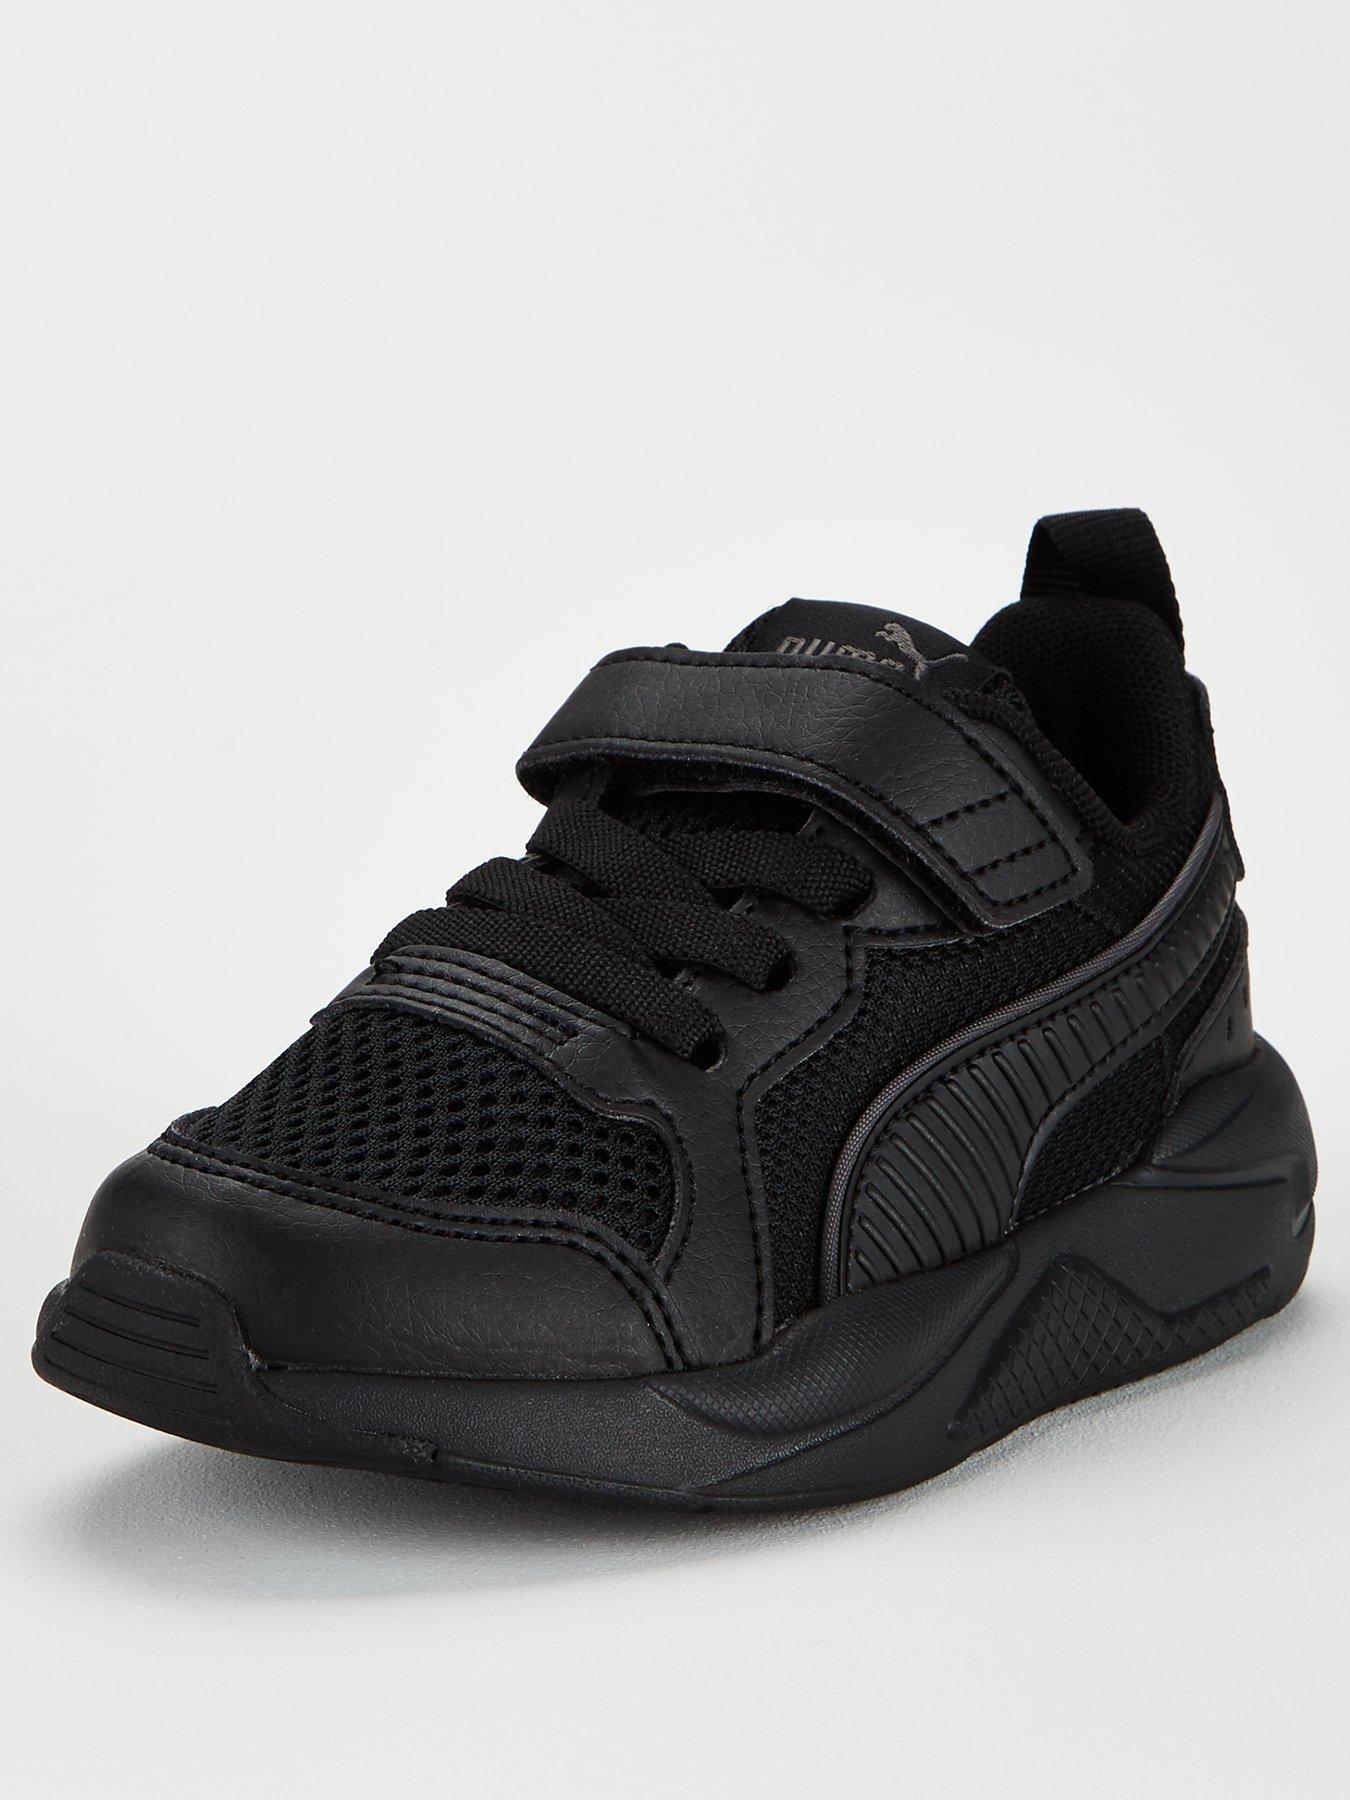 Latest Offers | up to £1 | Puma | Child 